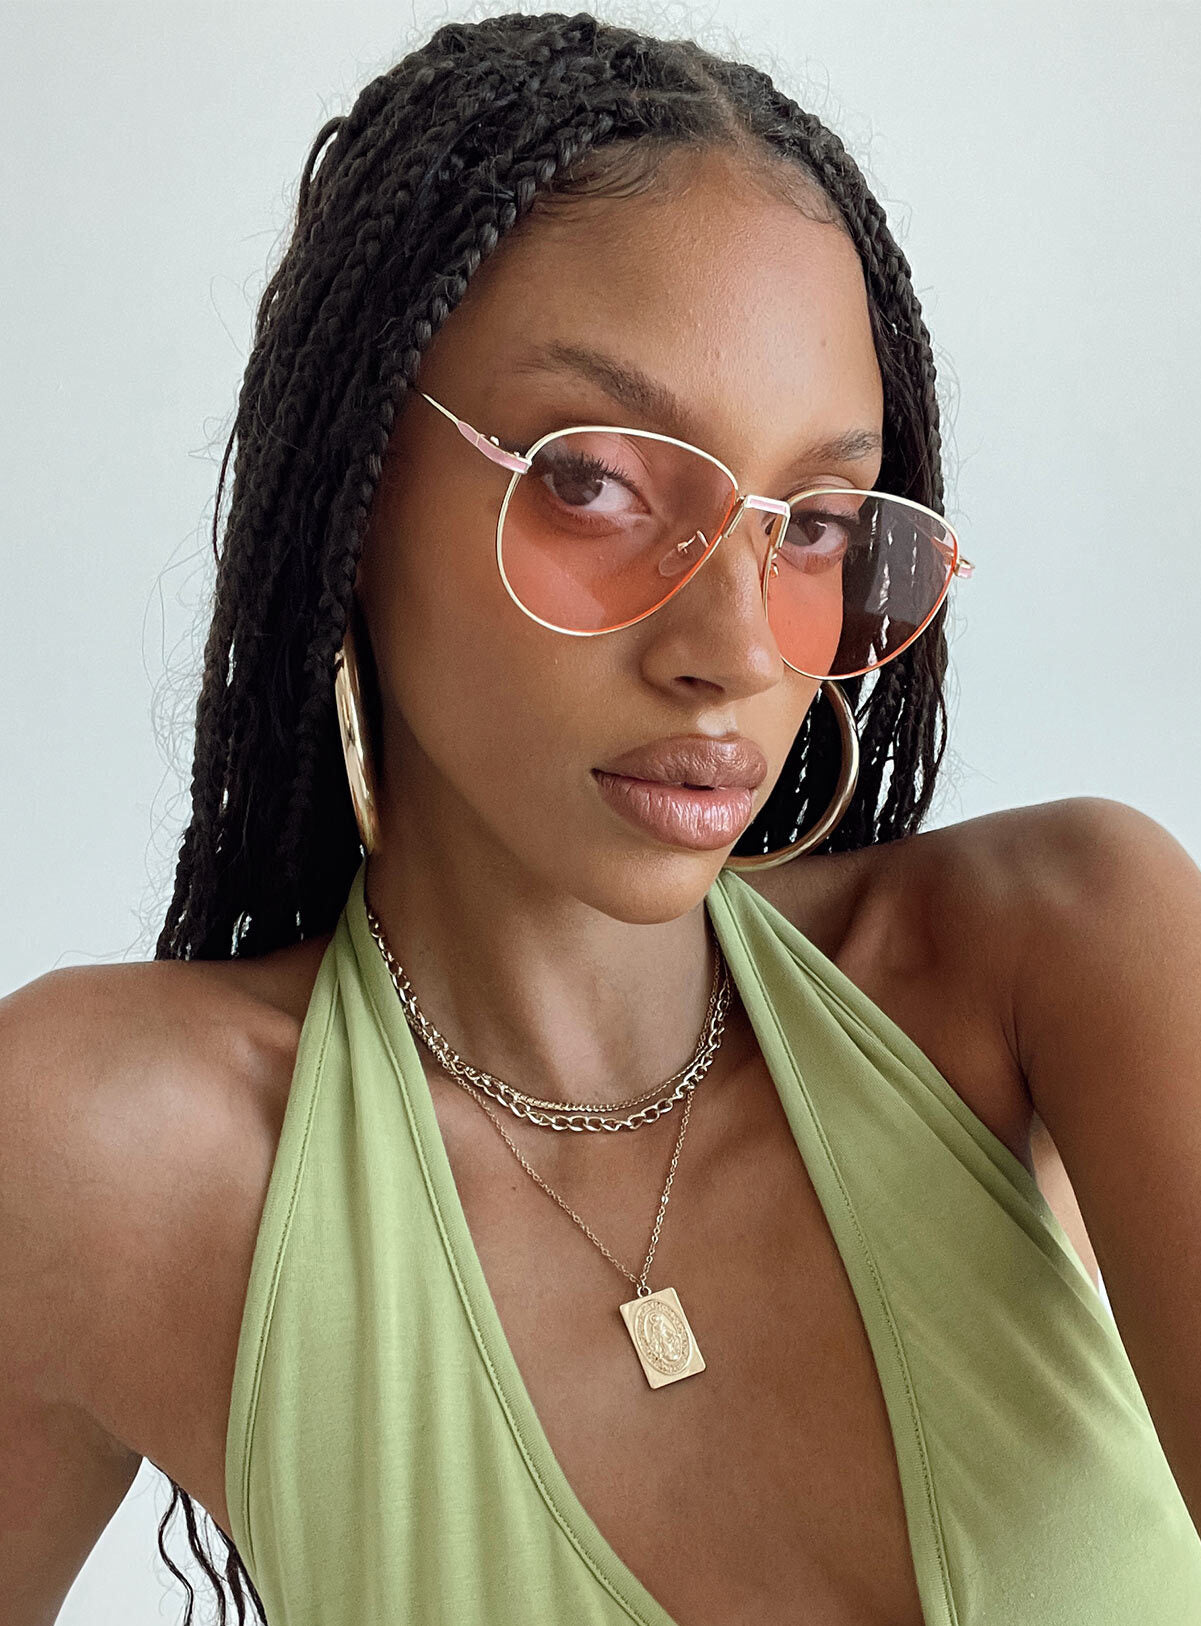 Aggregate 273+ pink sunglasses necklace best